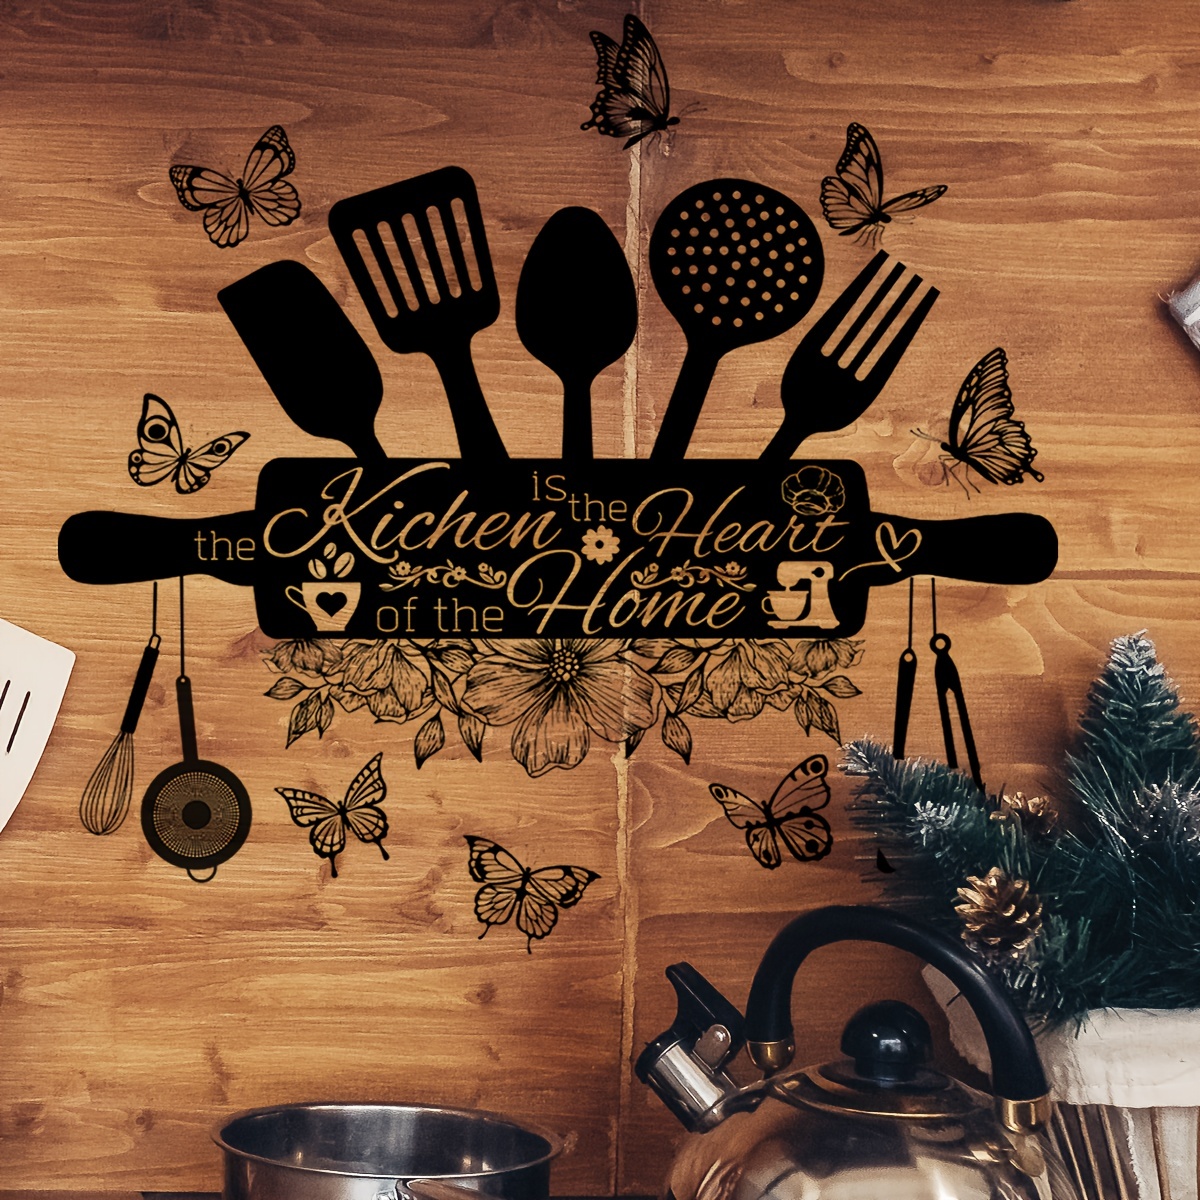 

1pc Rustic Wooden Utensils Butterflies 3d Wall Decal, "the Kitchen Is The Heart Of The Home" Festive Sign, 15.74inch X 11.81inch, Removable Self-adhesive Holiday Wall Decor For Farmhouse & Home